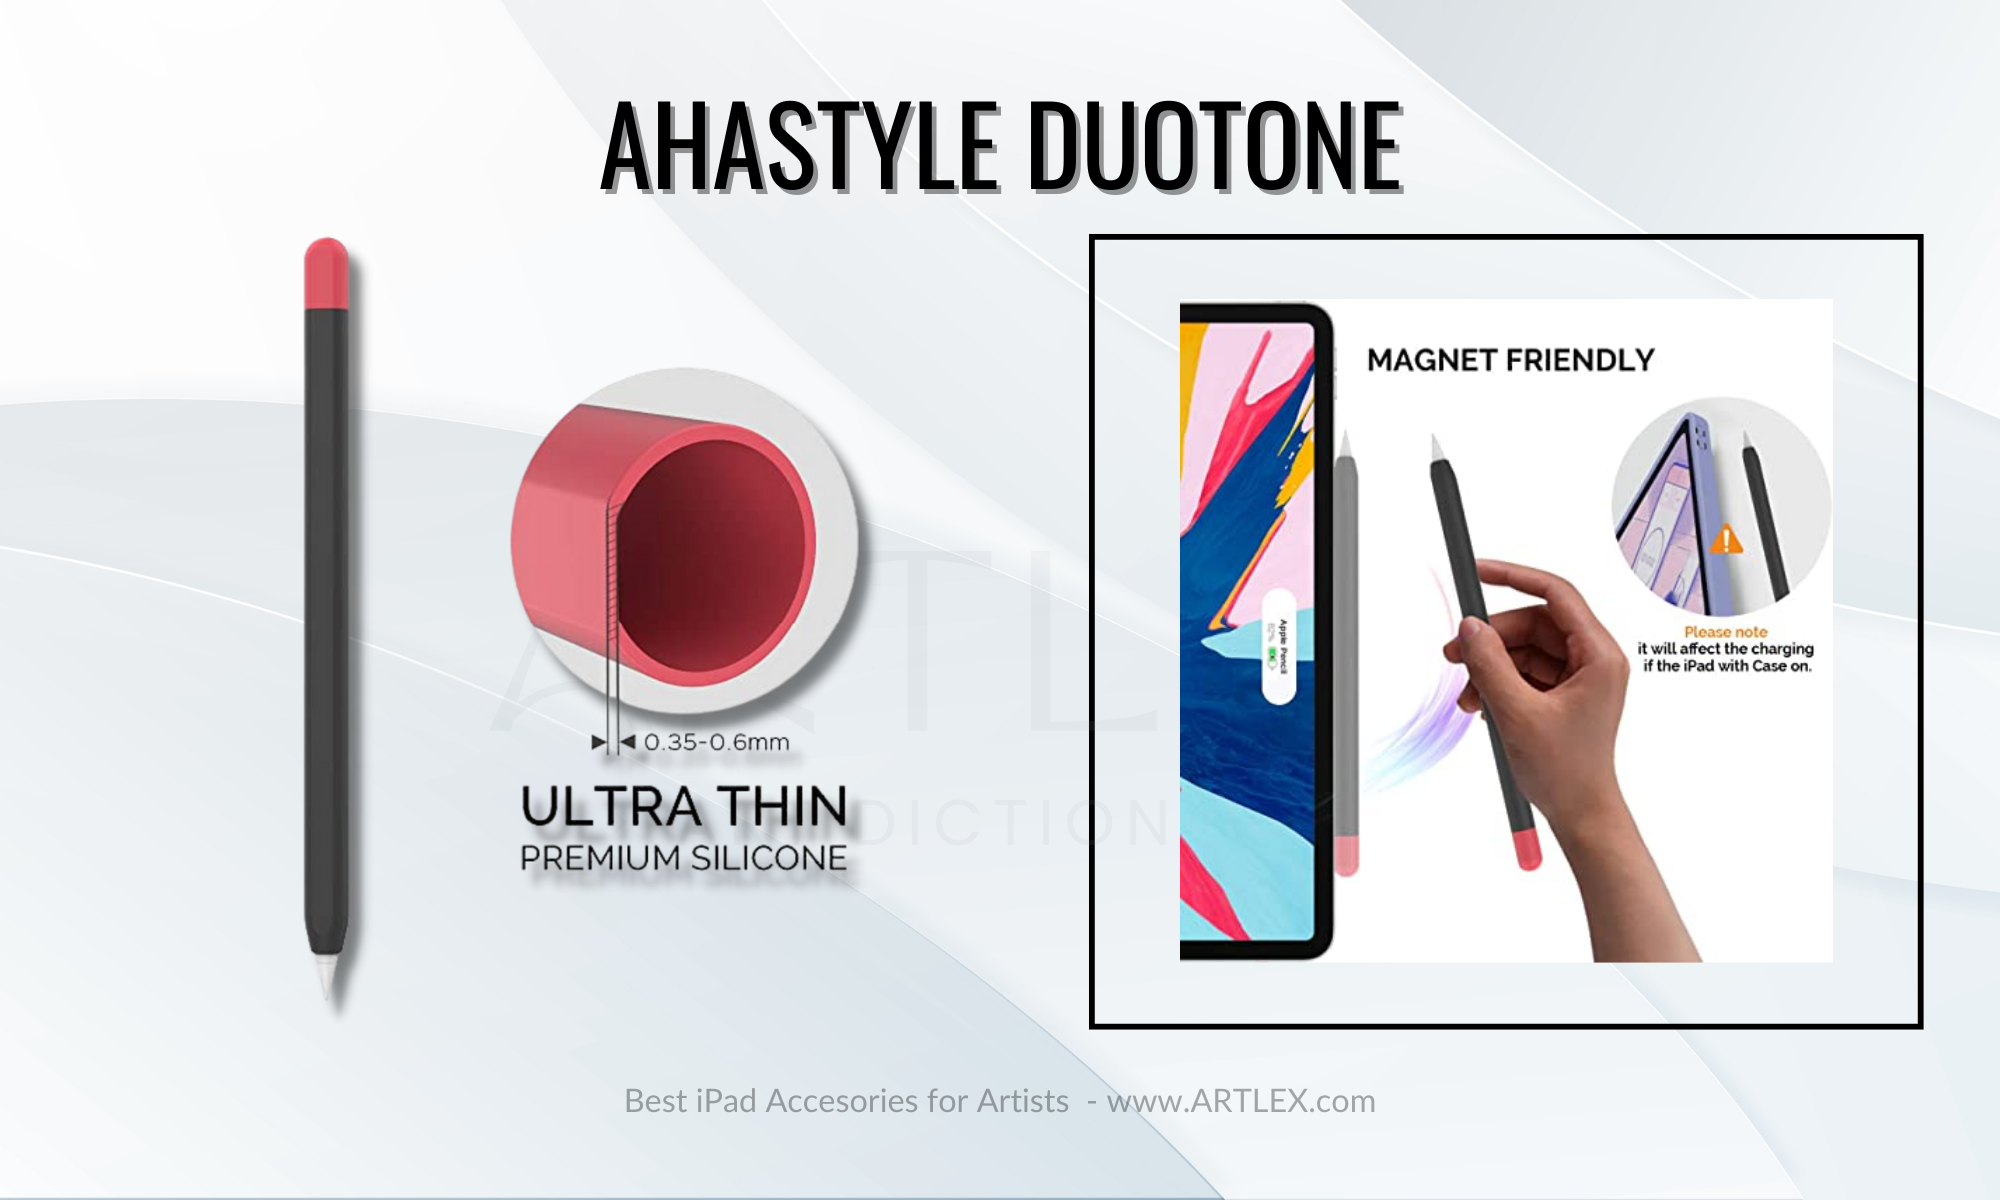 Best Apple Pencil Cover Overall — AhaStyle Duotone